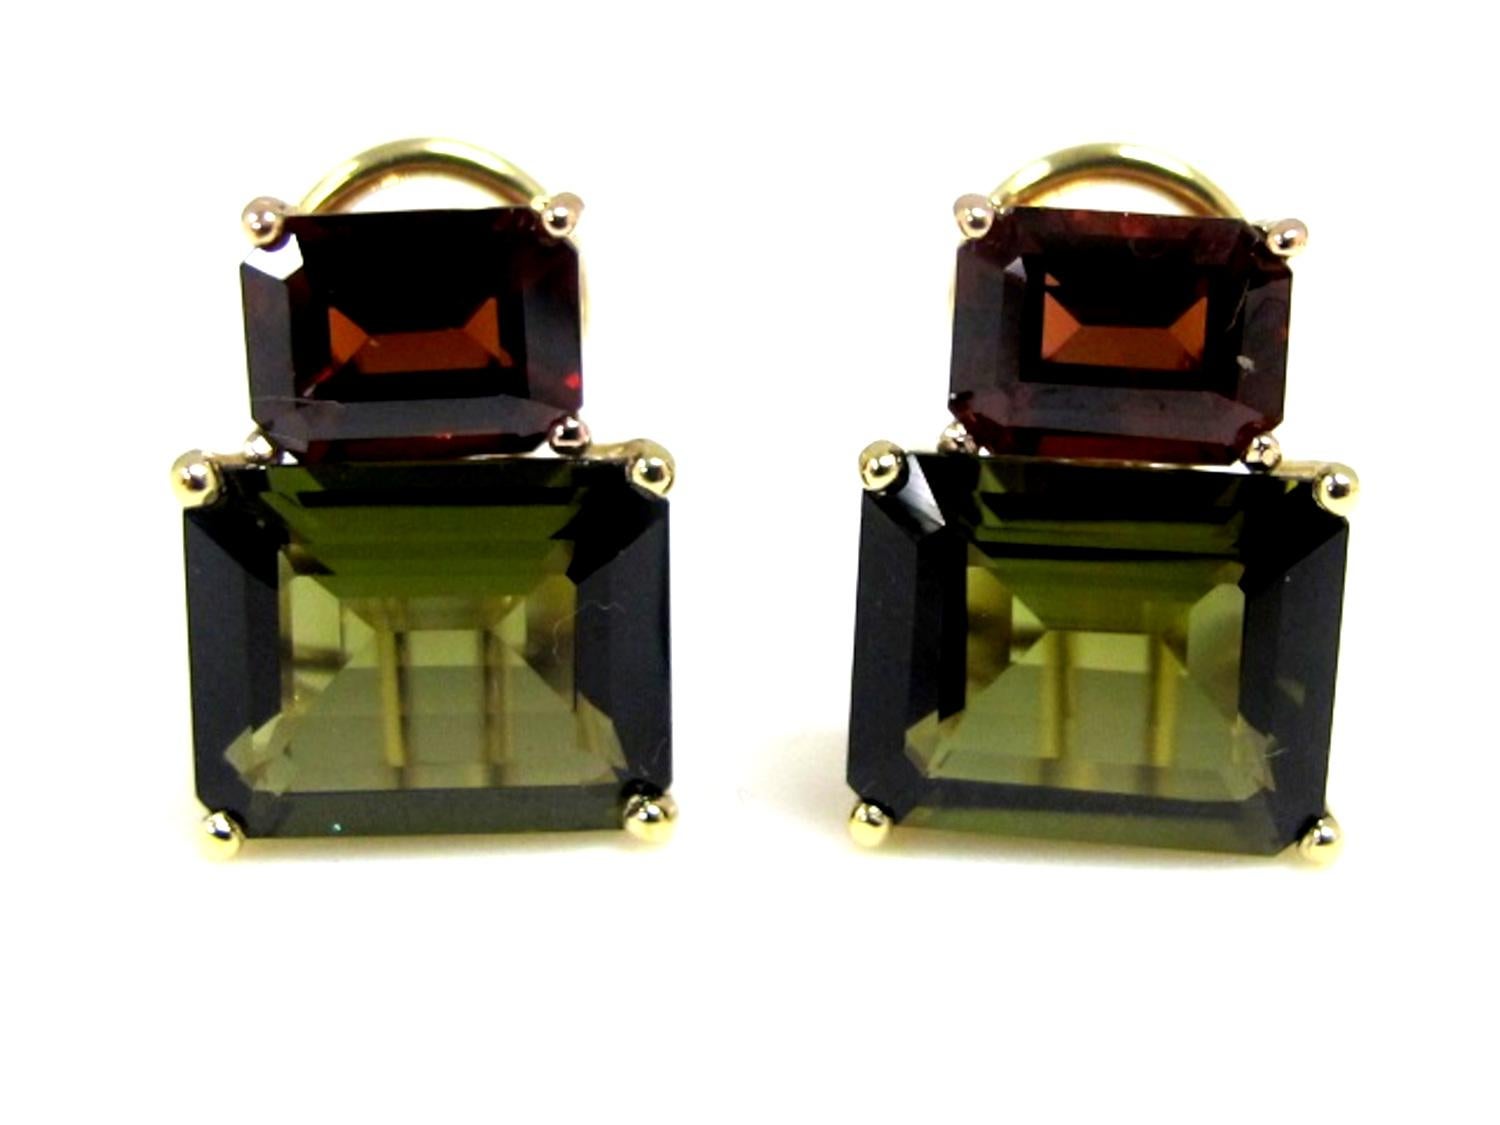 These chic earrings are reminiscent of late autumn olives ripening in an artisanal vineyard.  Handmade of 18k yellow and rose gold and featuring emerald-cut olive green tourmalines and deep, brick-red garnets. French clip backs are included for